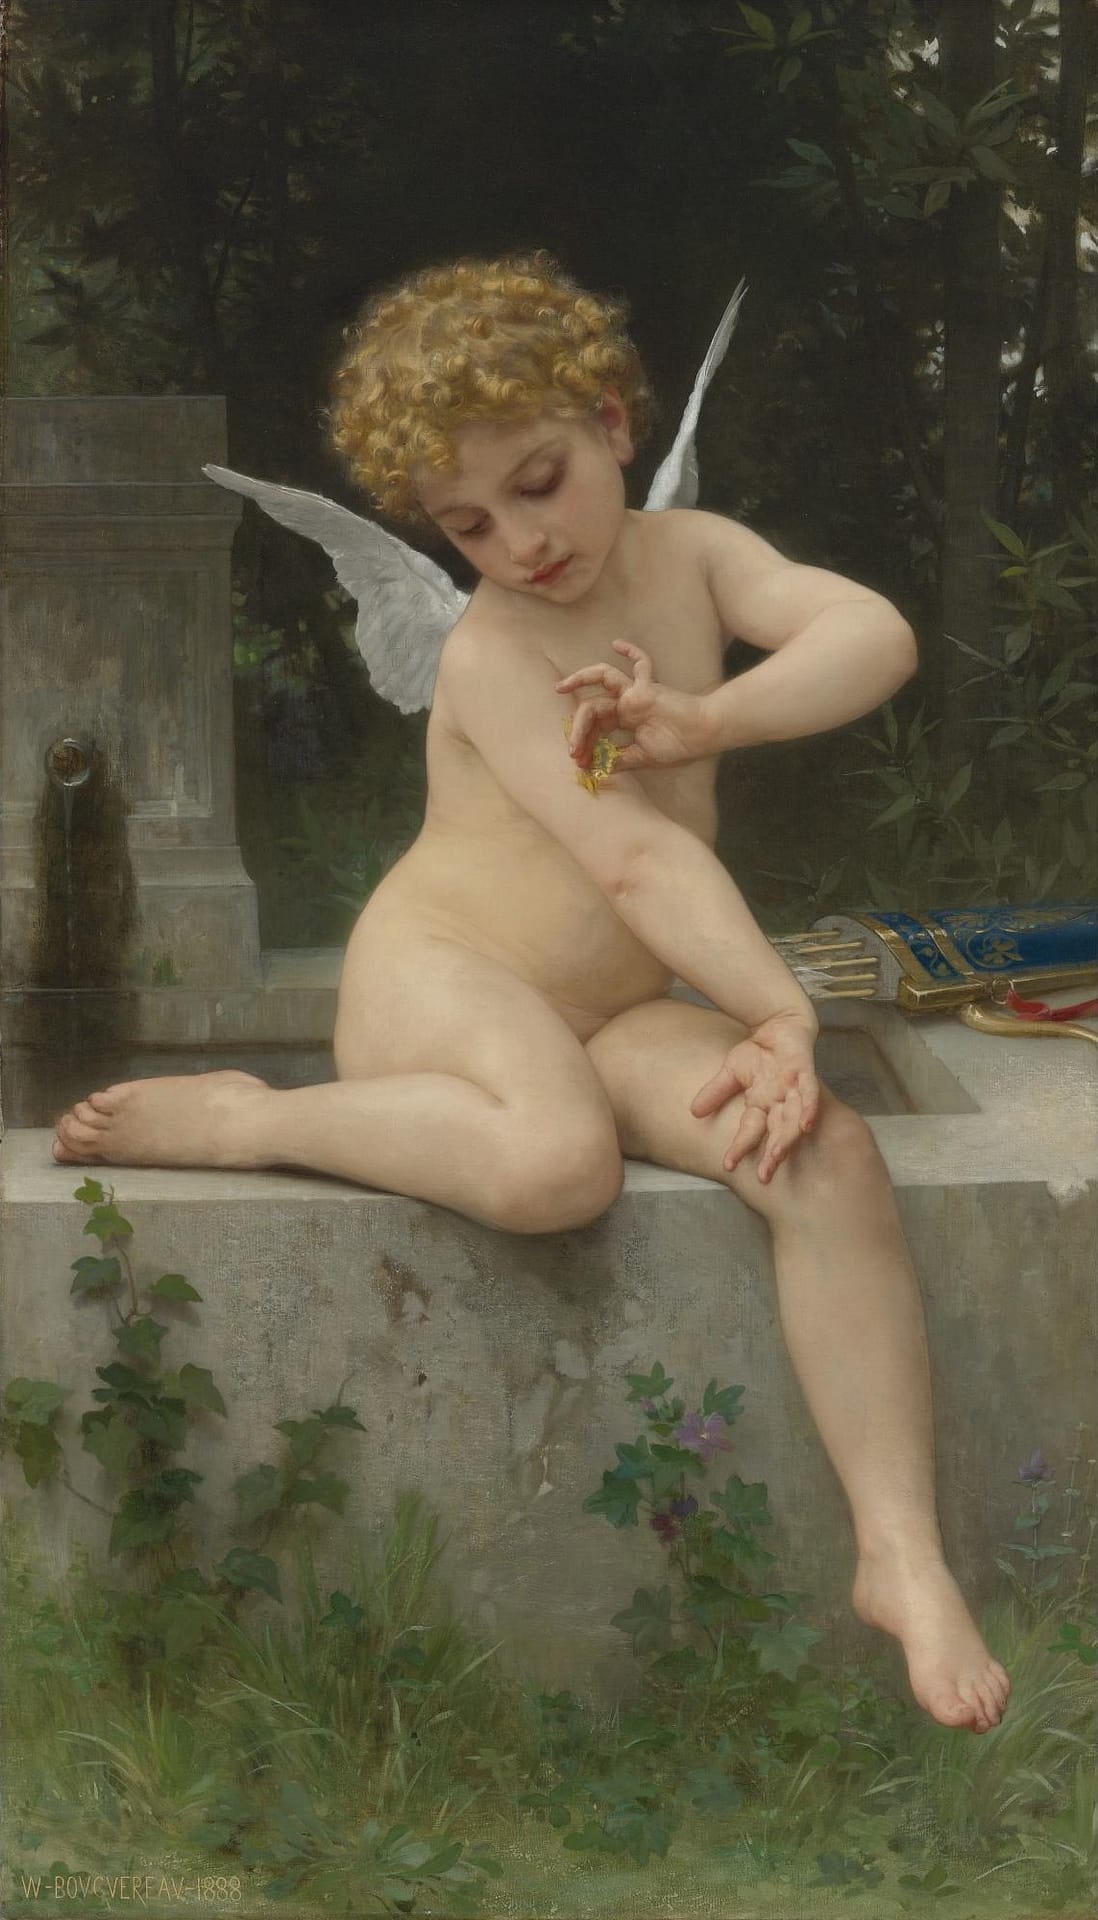 Cupid with a Butterfly by William Adolphe Bouguereau via Wiki Commons